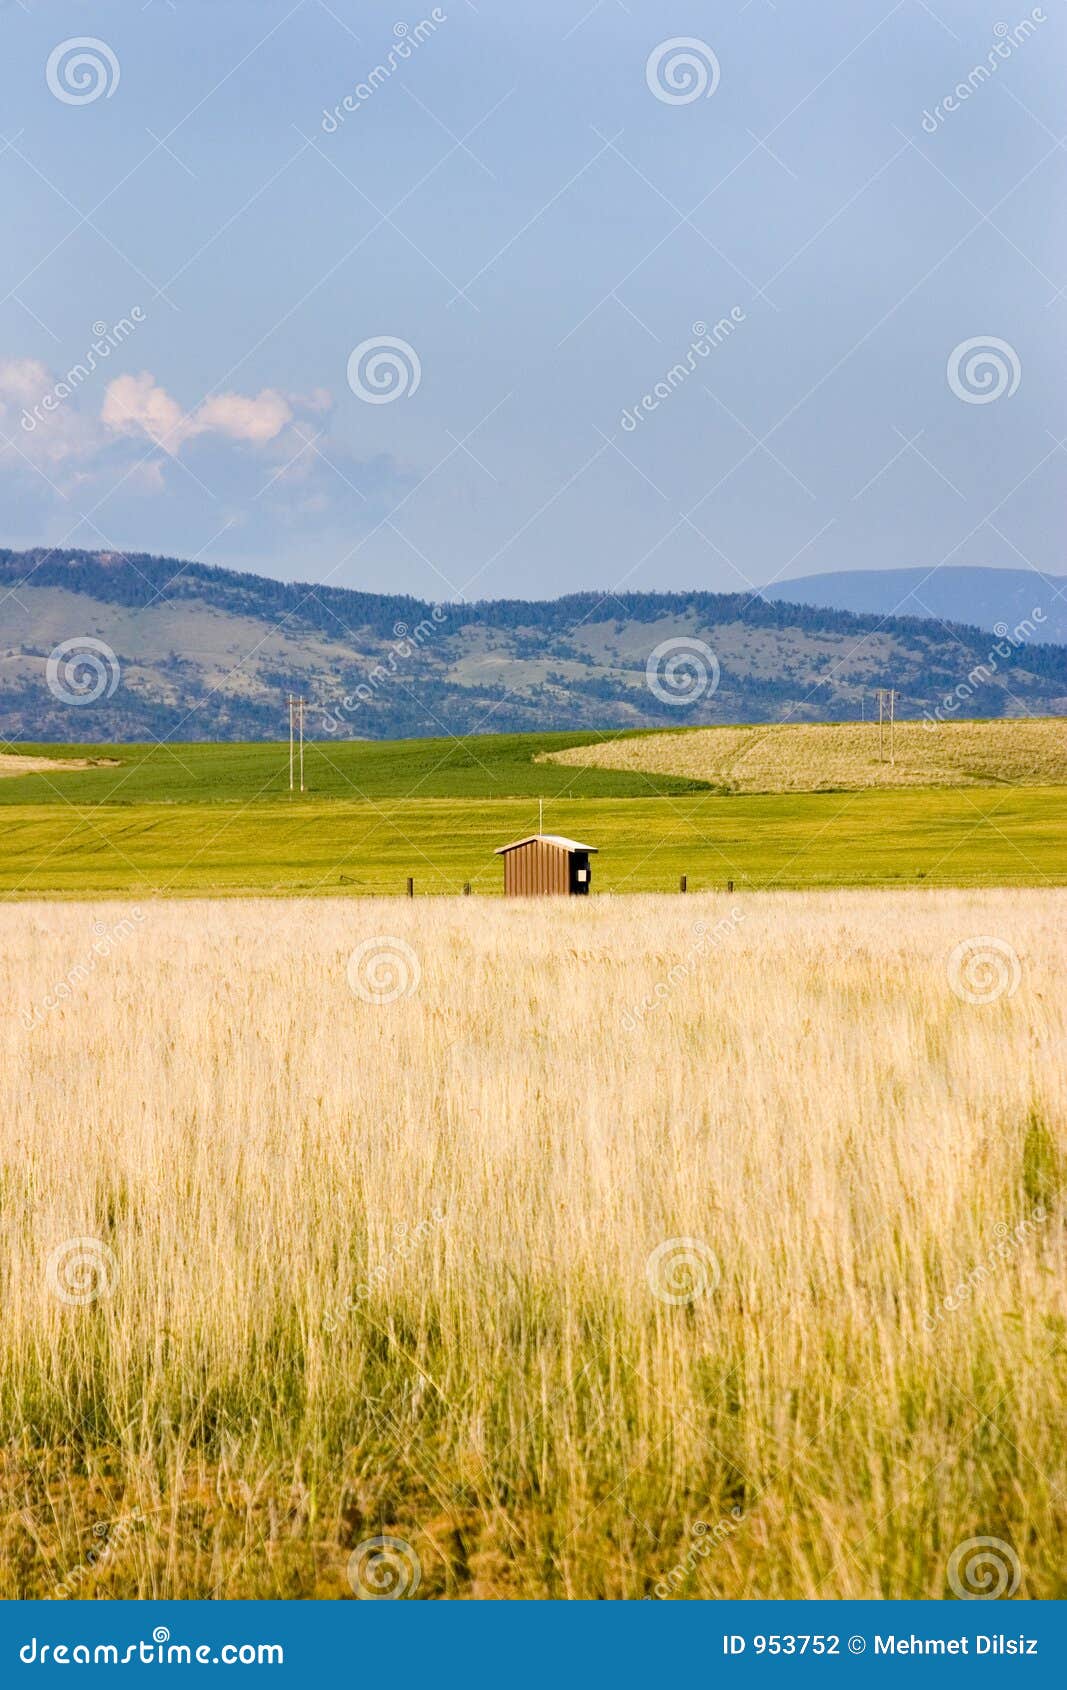 field in helena with a shed and mountains on the background